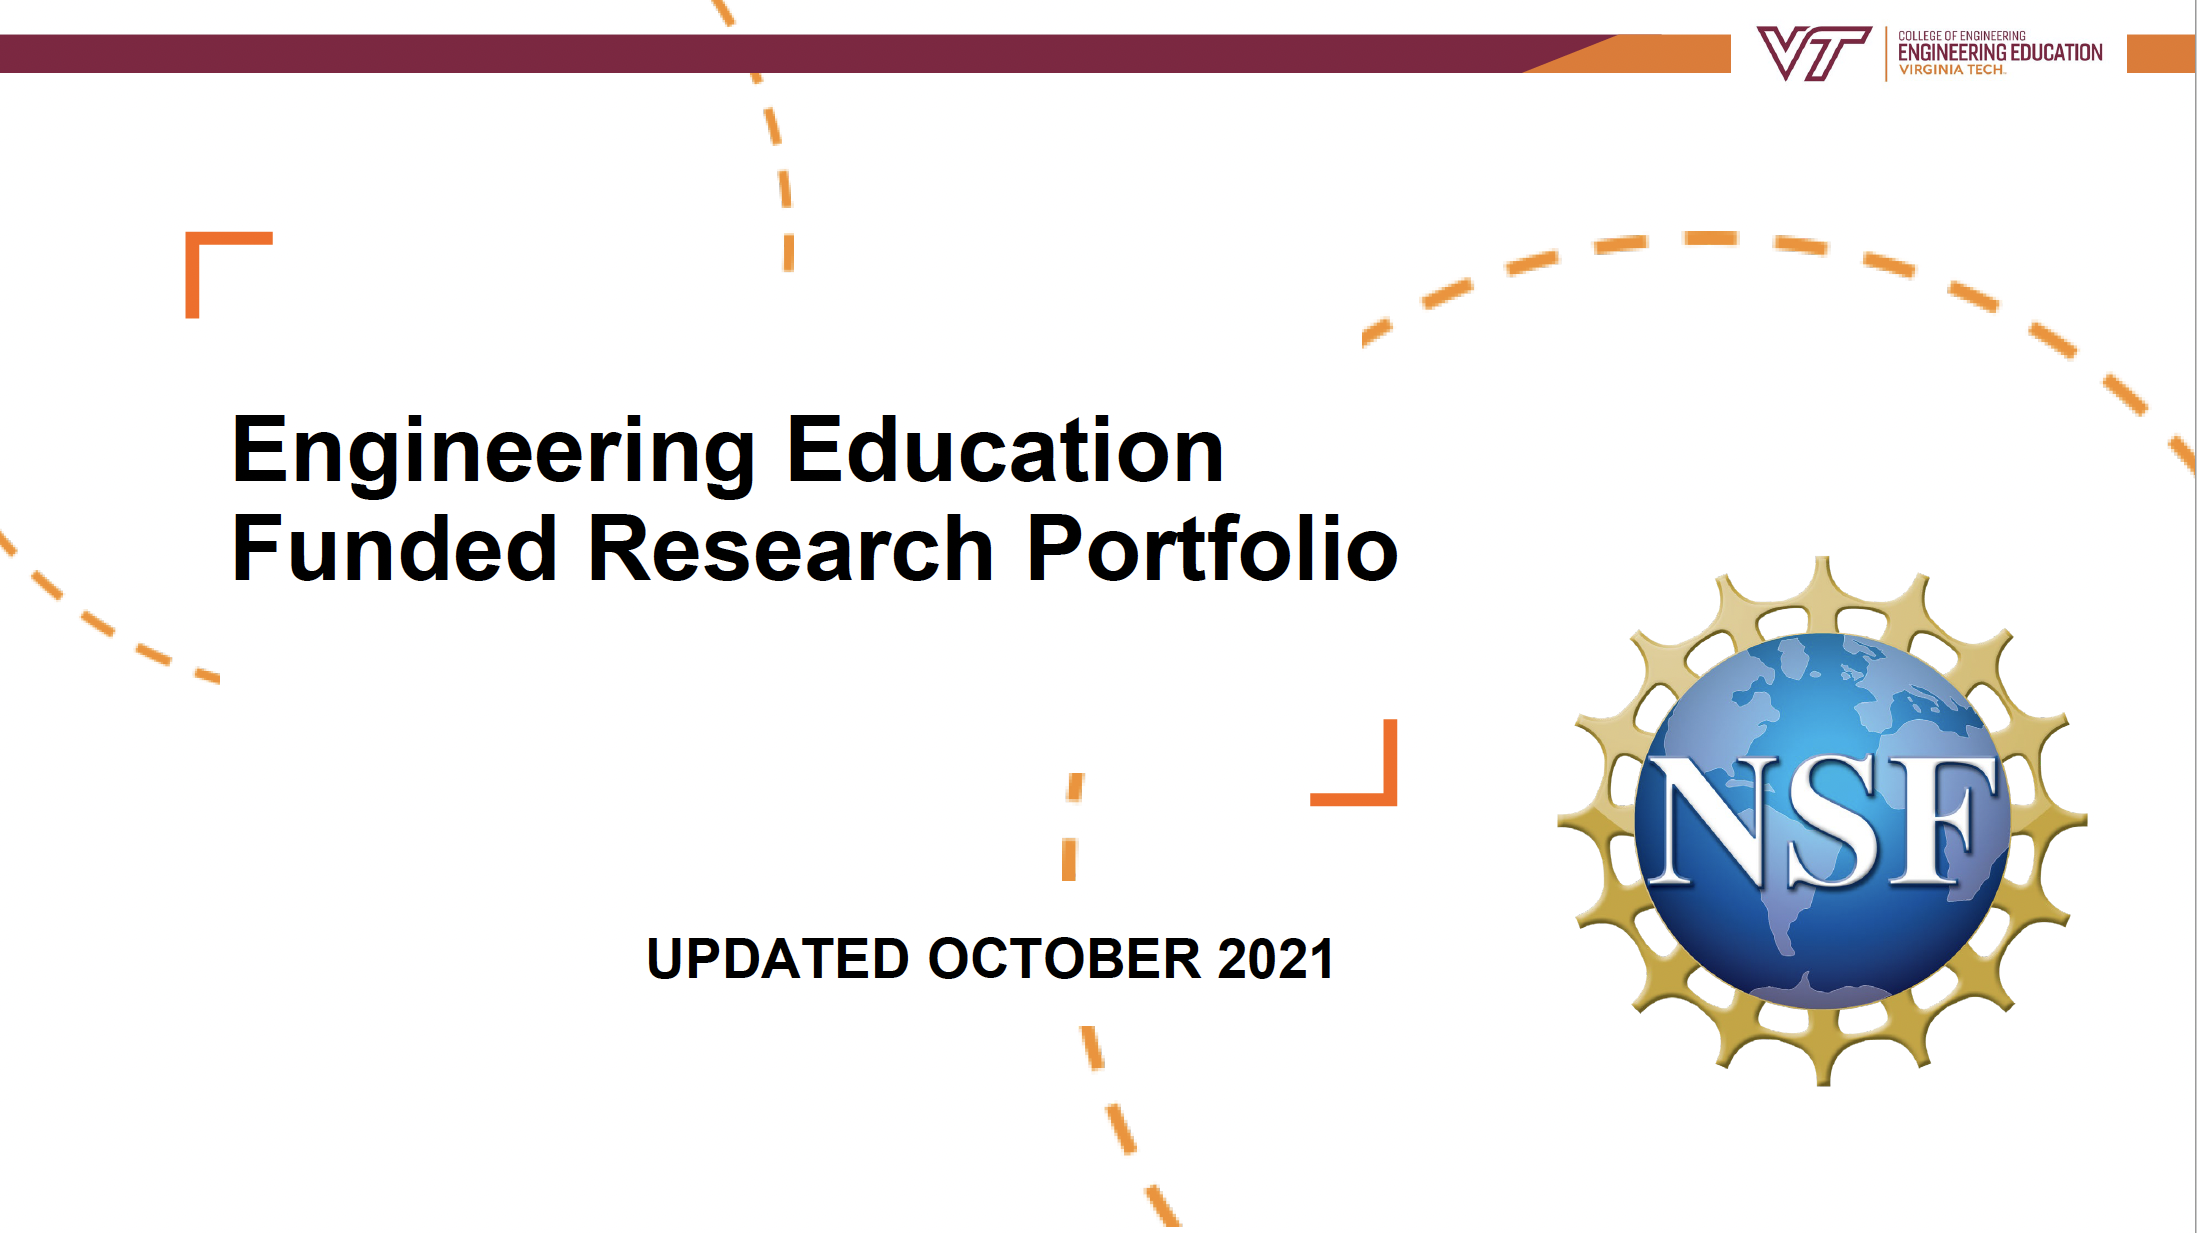 Engineering Education Funded Research Portfolio Updated October 2021